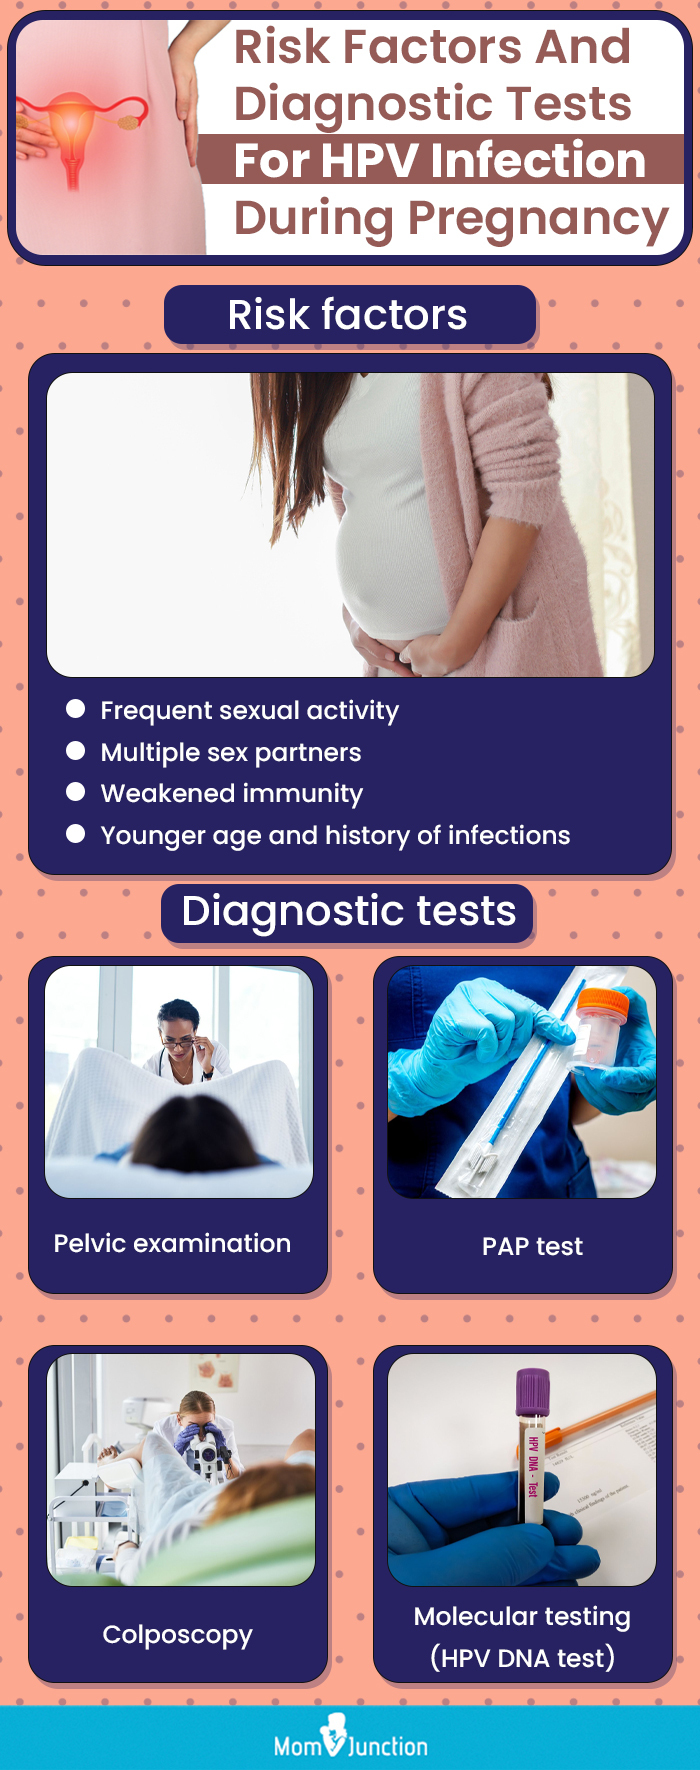 risk factors and diagnostic tests for hpv infection during pregnancy (infographic)